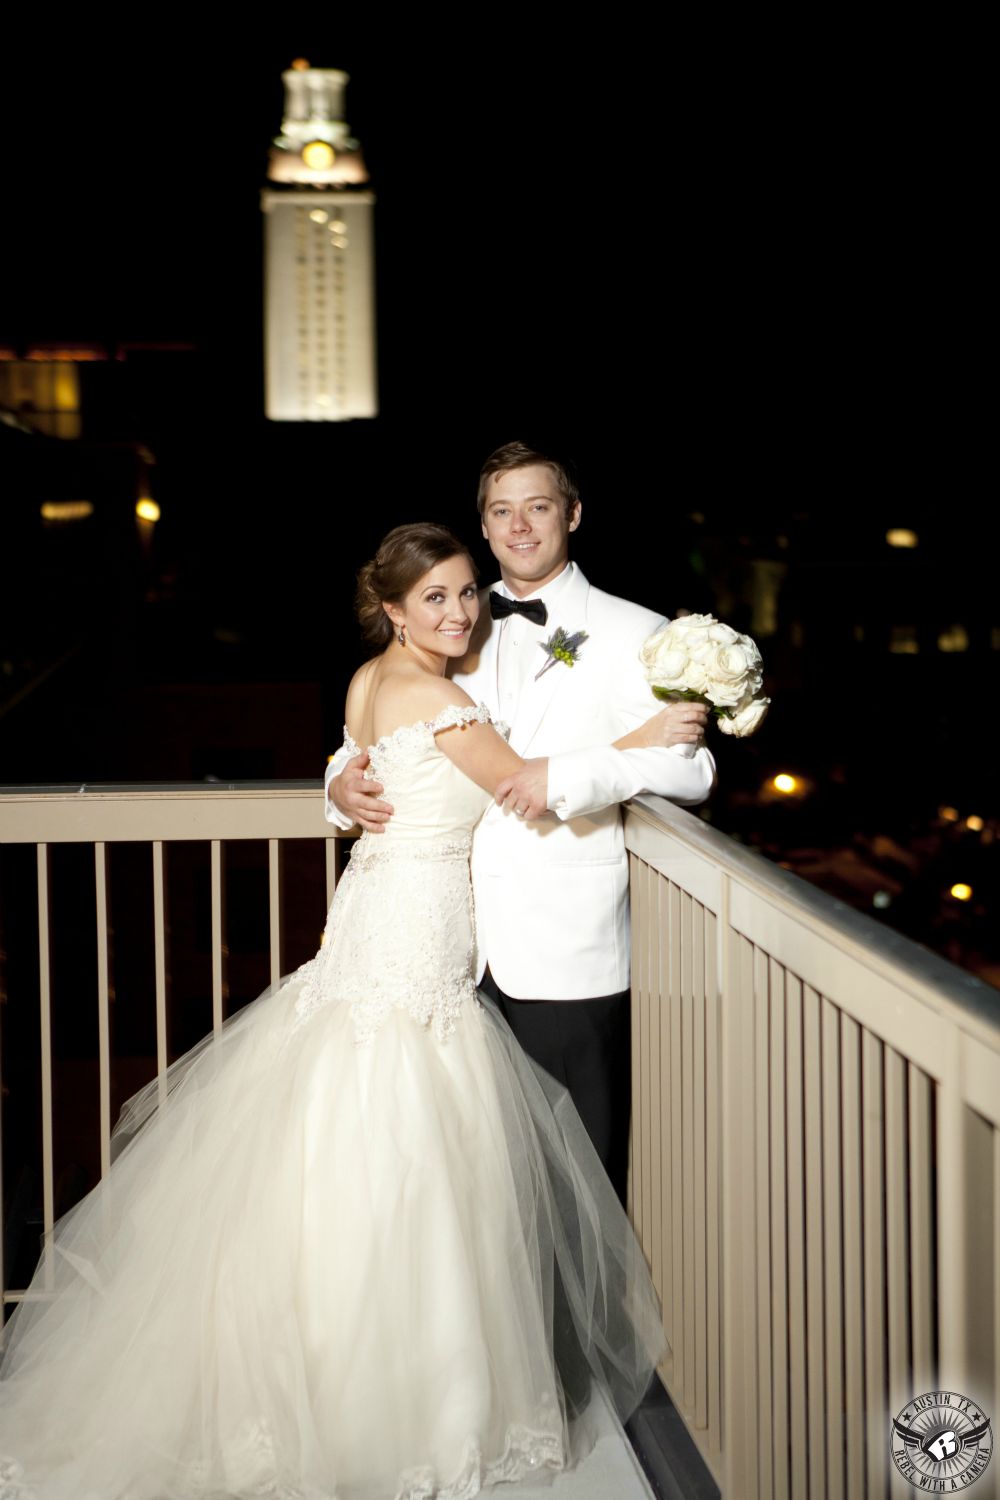 Bride in gorgeous wedding dress and groom in white tuxedo jacket and black bowtie happy in love standing on the balcony at the AT&T Executive Education and Conference Center at night with the UT tower in the background on their wedding day.